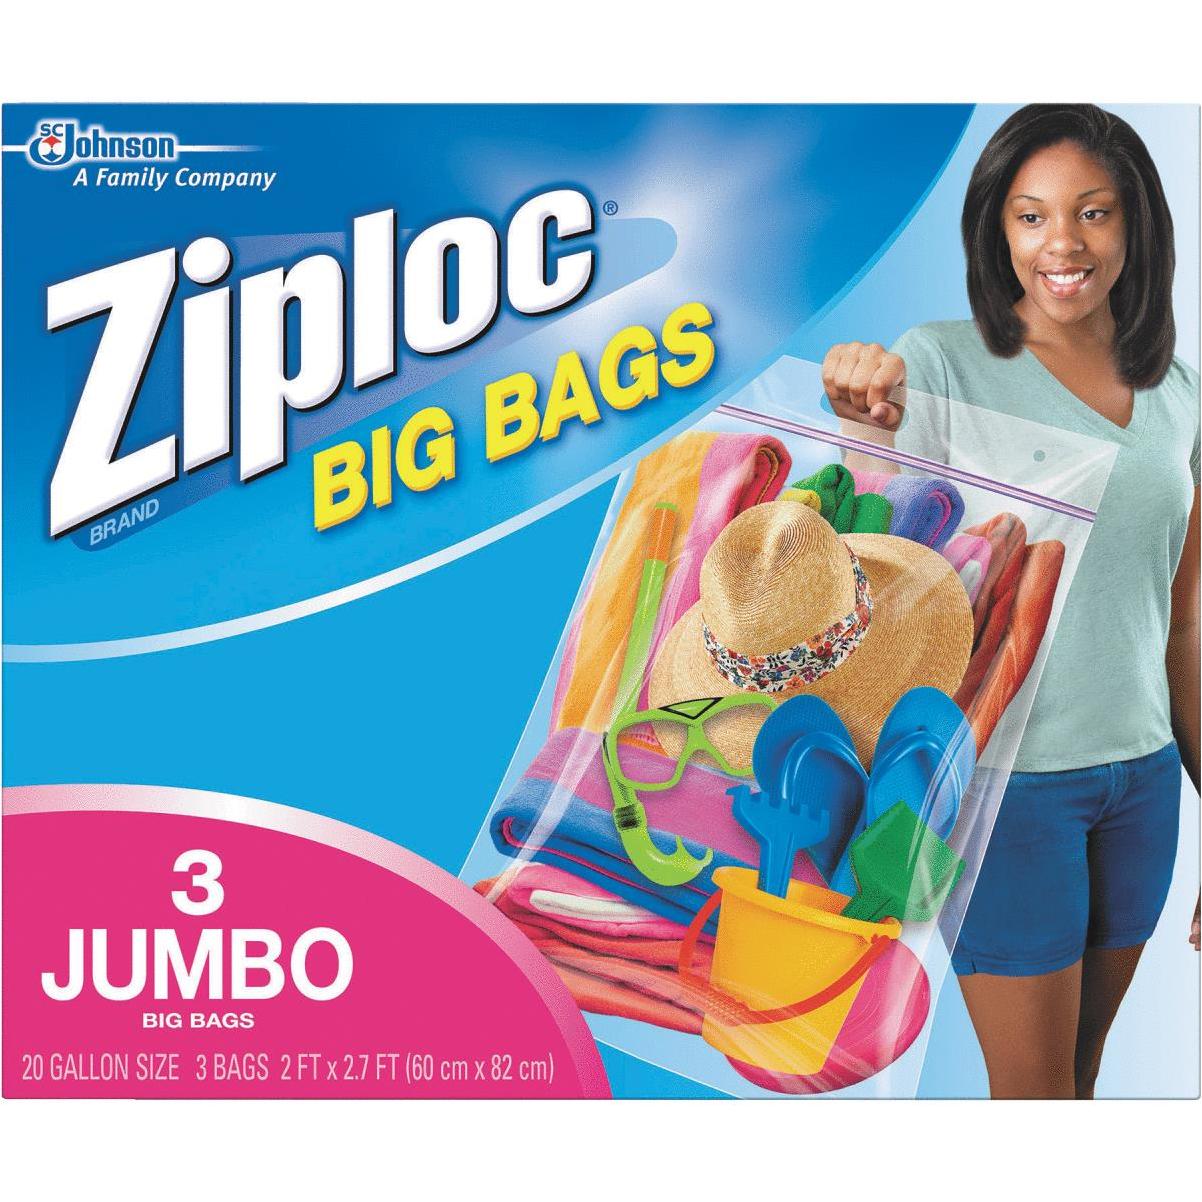 Hefty Slider Jumbo Storage Bags 25 Gallon Size 12 Count Only 279  Shipped  Freebies2Deals